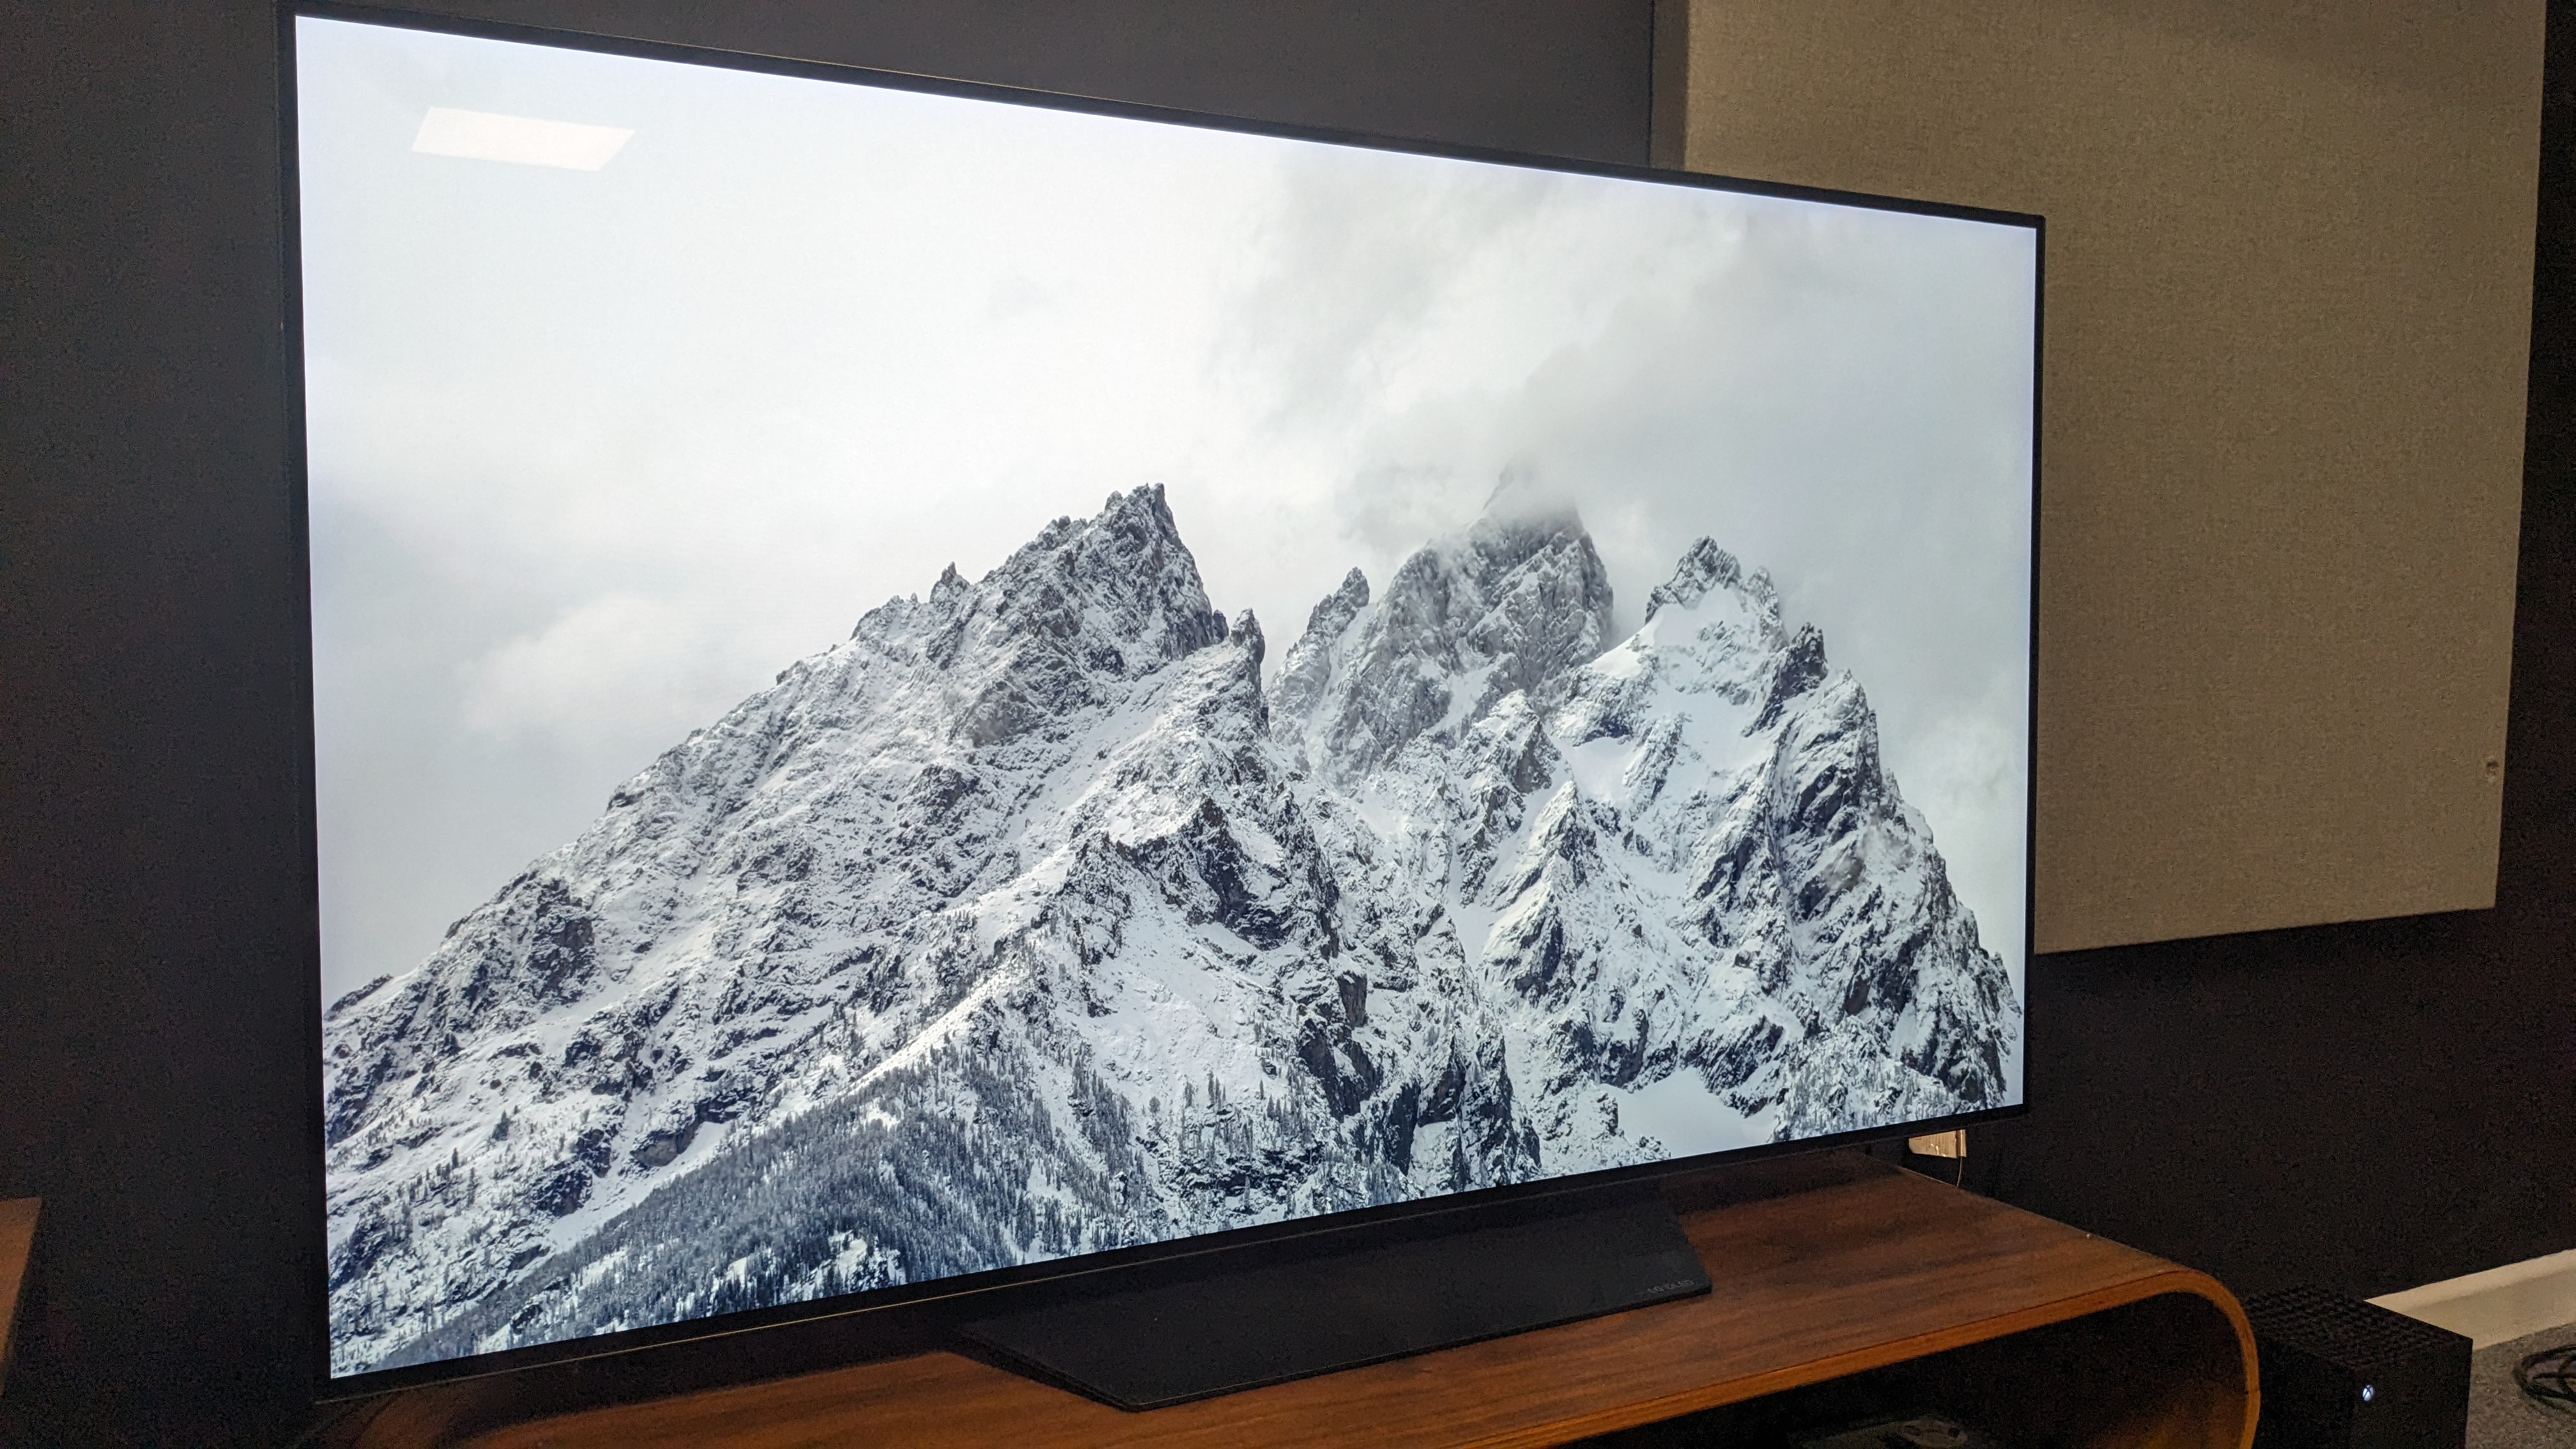 LG B3 review: LG's cheapest OLED TV packs a lot of performance